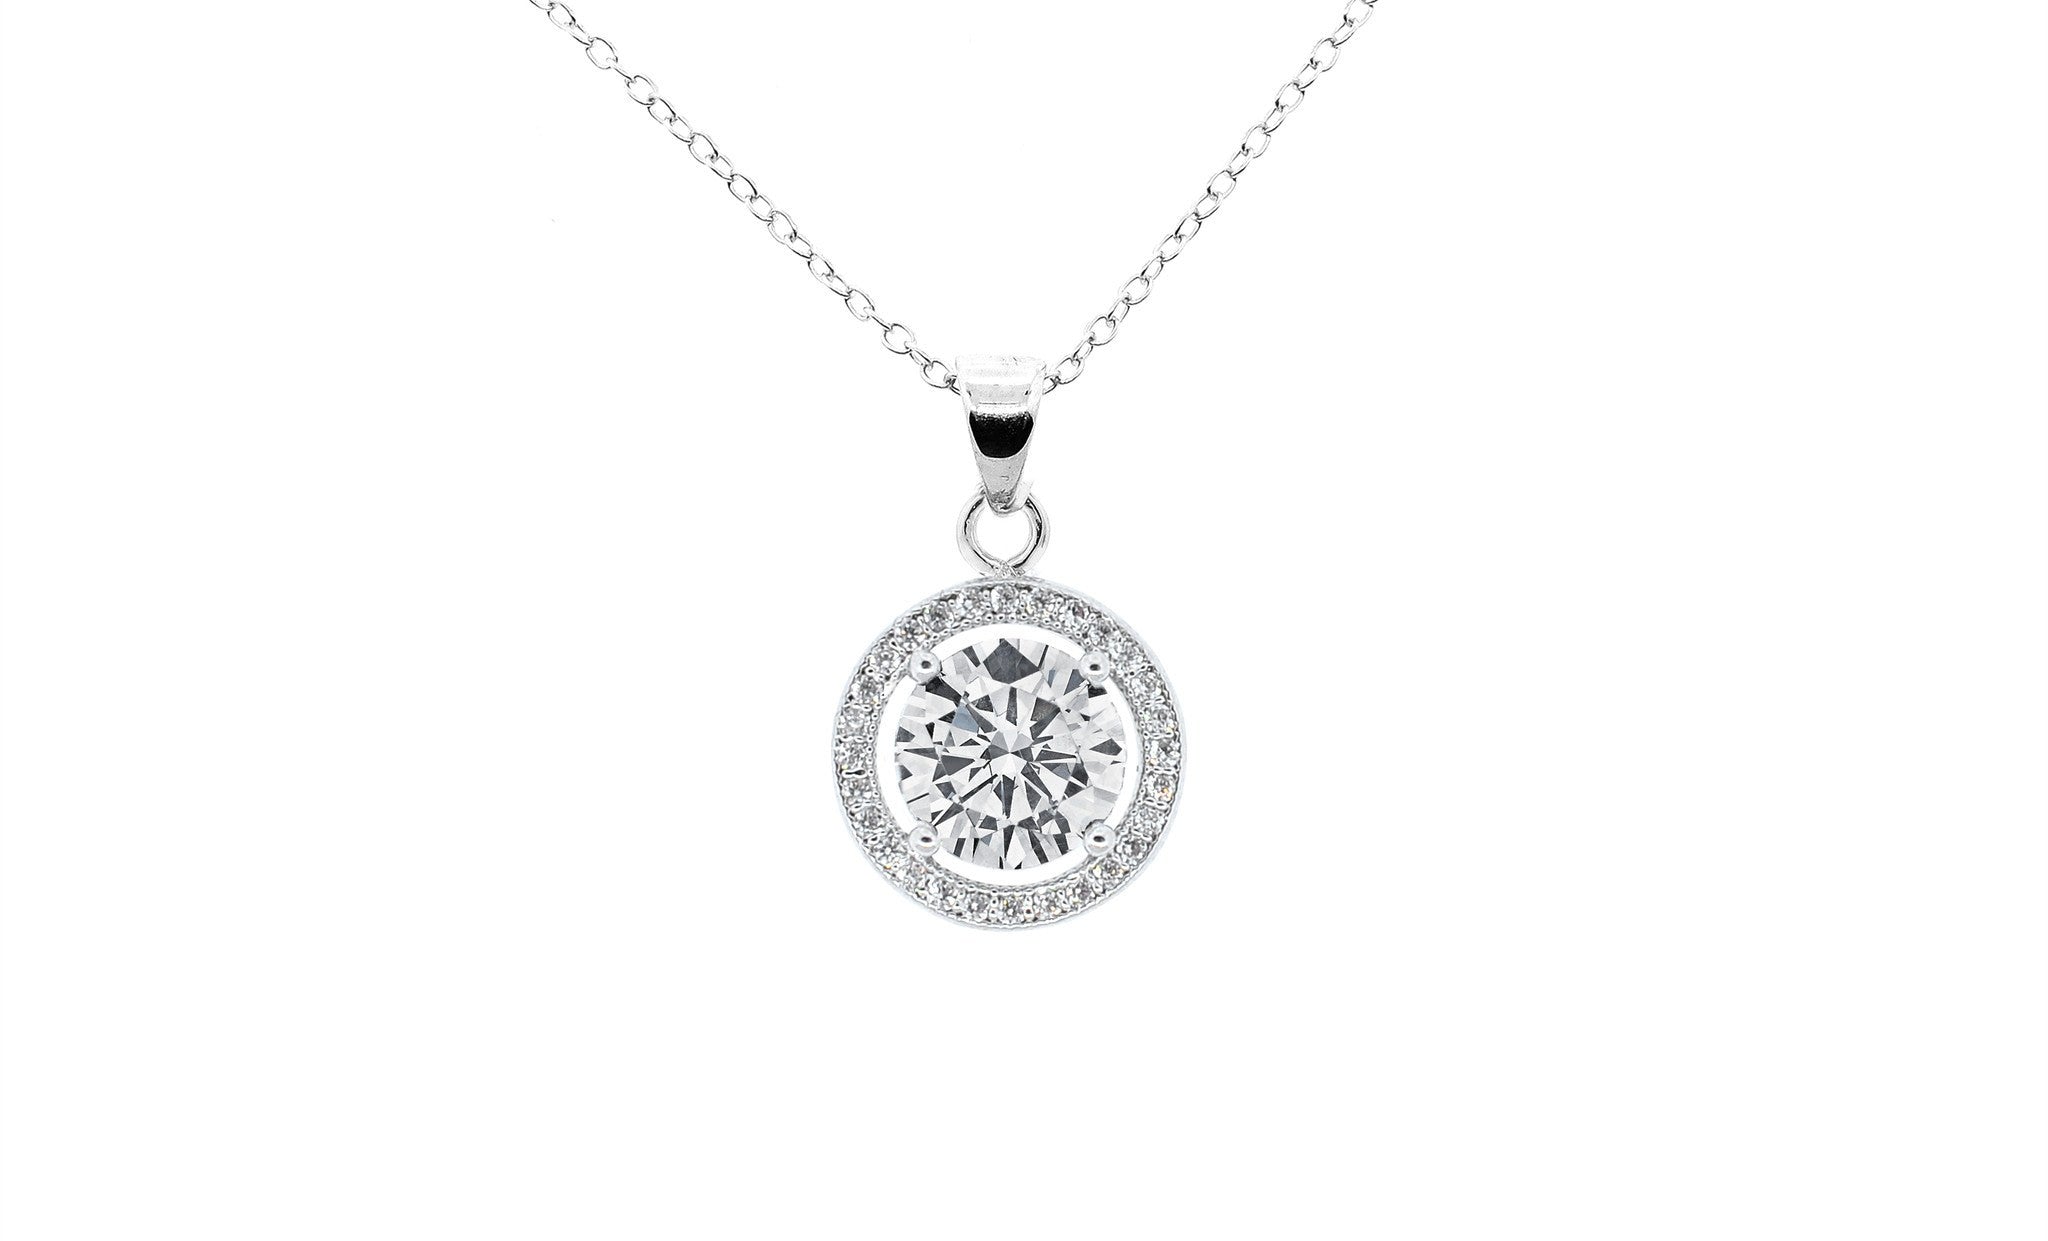 Jewelry, Necklace, Pendant - Blake "True" 18k White Gold Plated Pendant Necklace